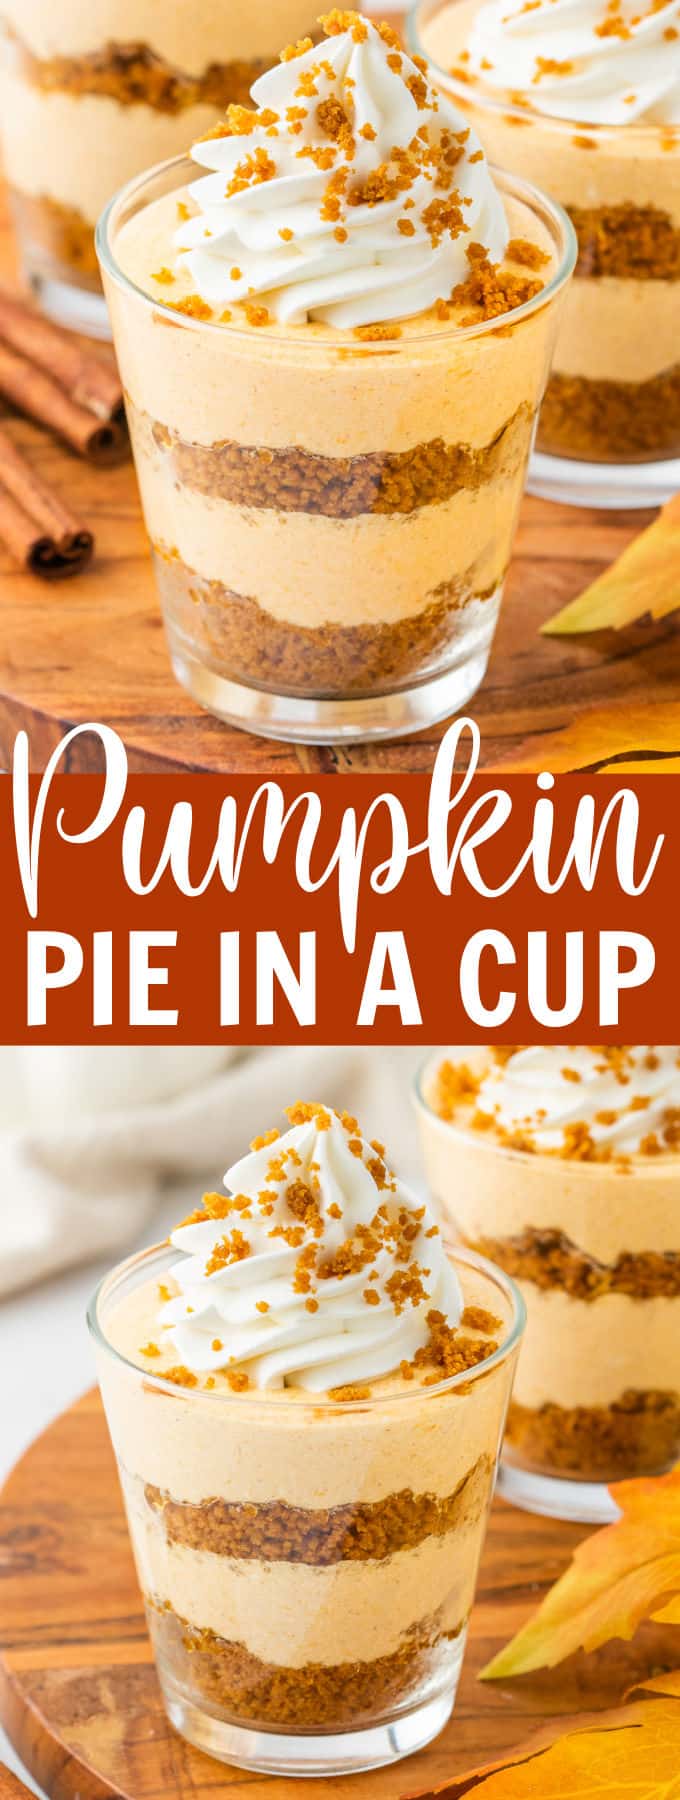 a glass cup filled with layers of cookie crumbs, pumpkin cheesecake, and whipped cream on top.